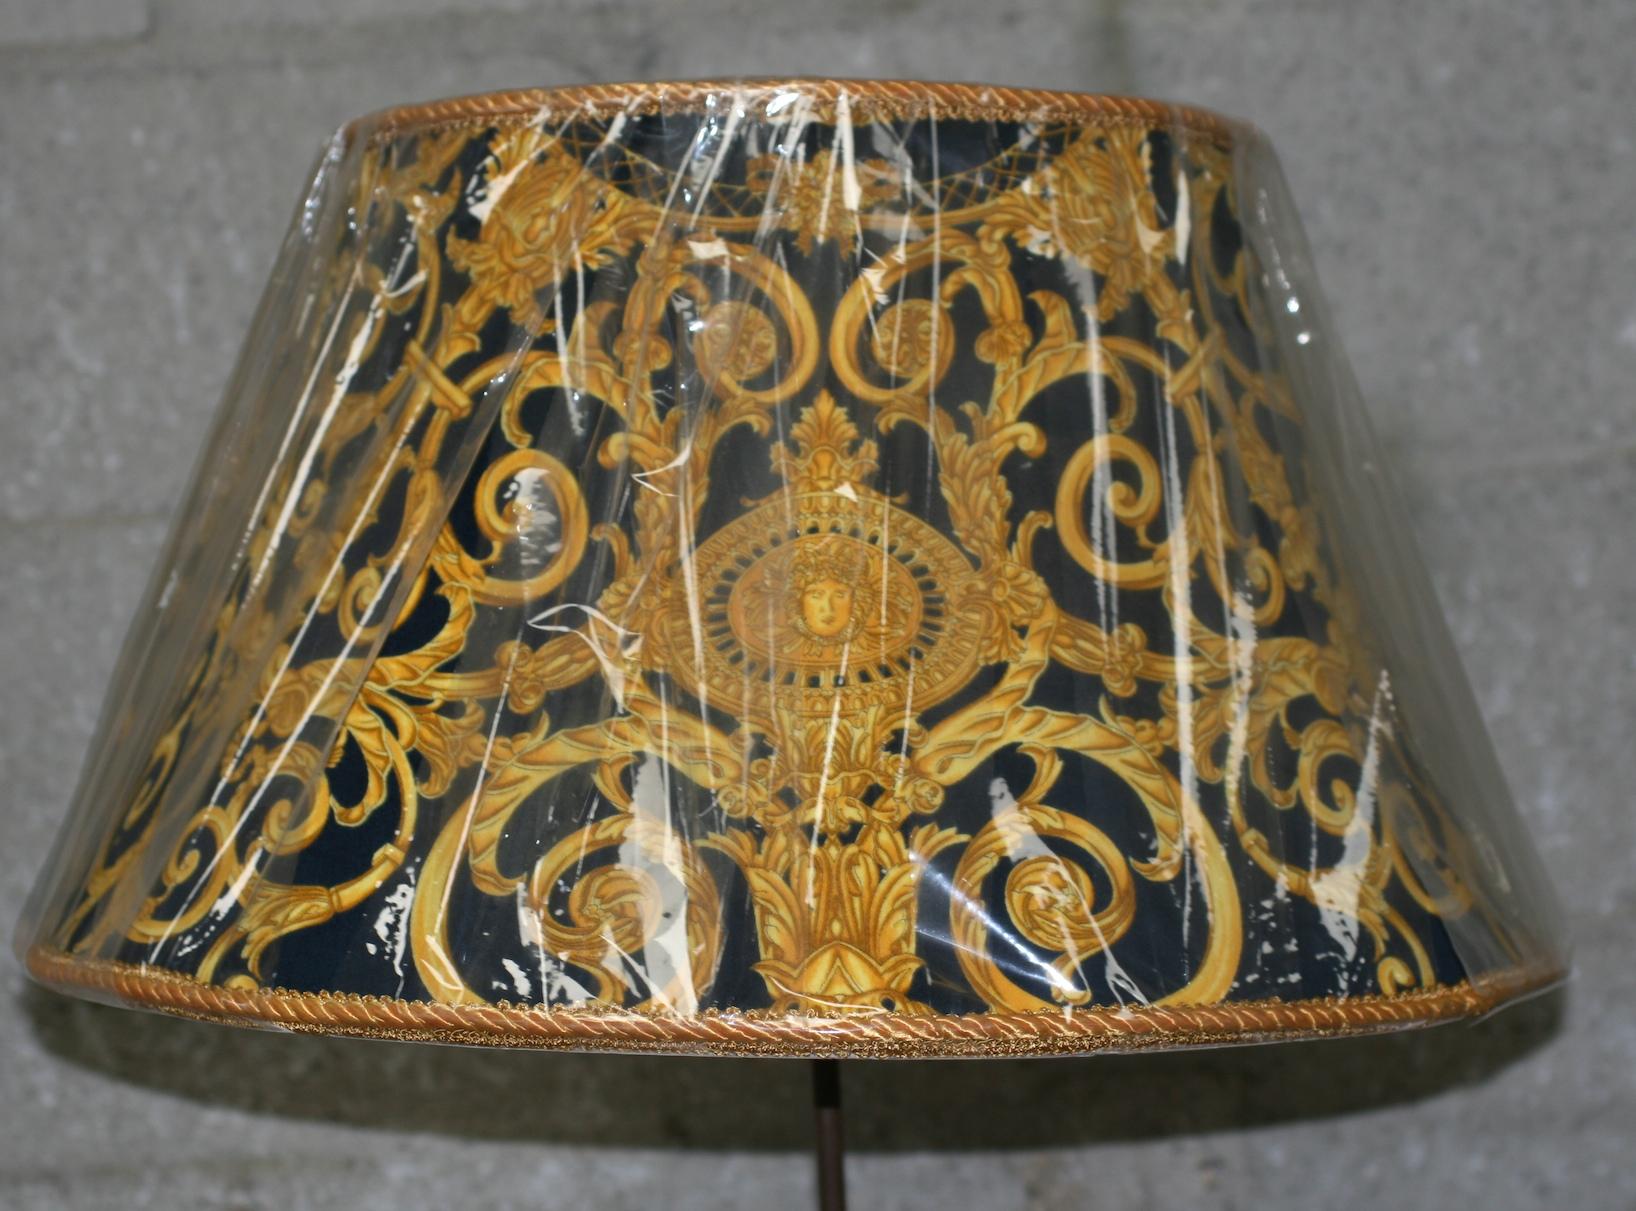 Baroque Revival Gianni Versace Barocco Lampshade For Sale